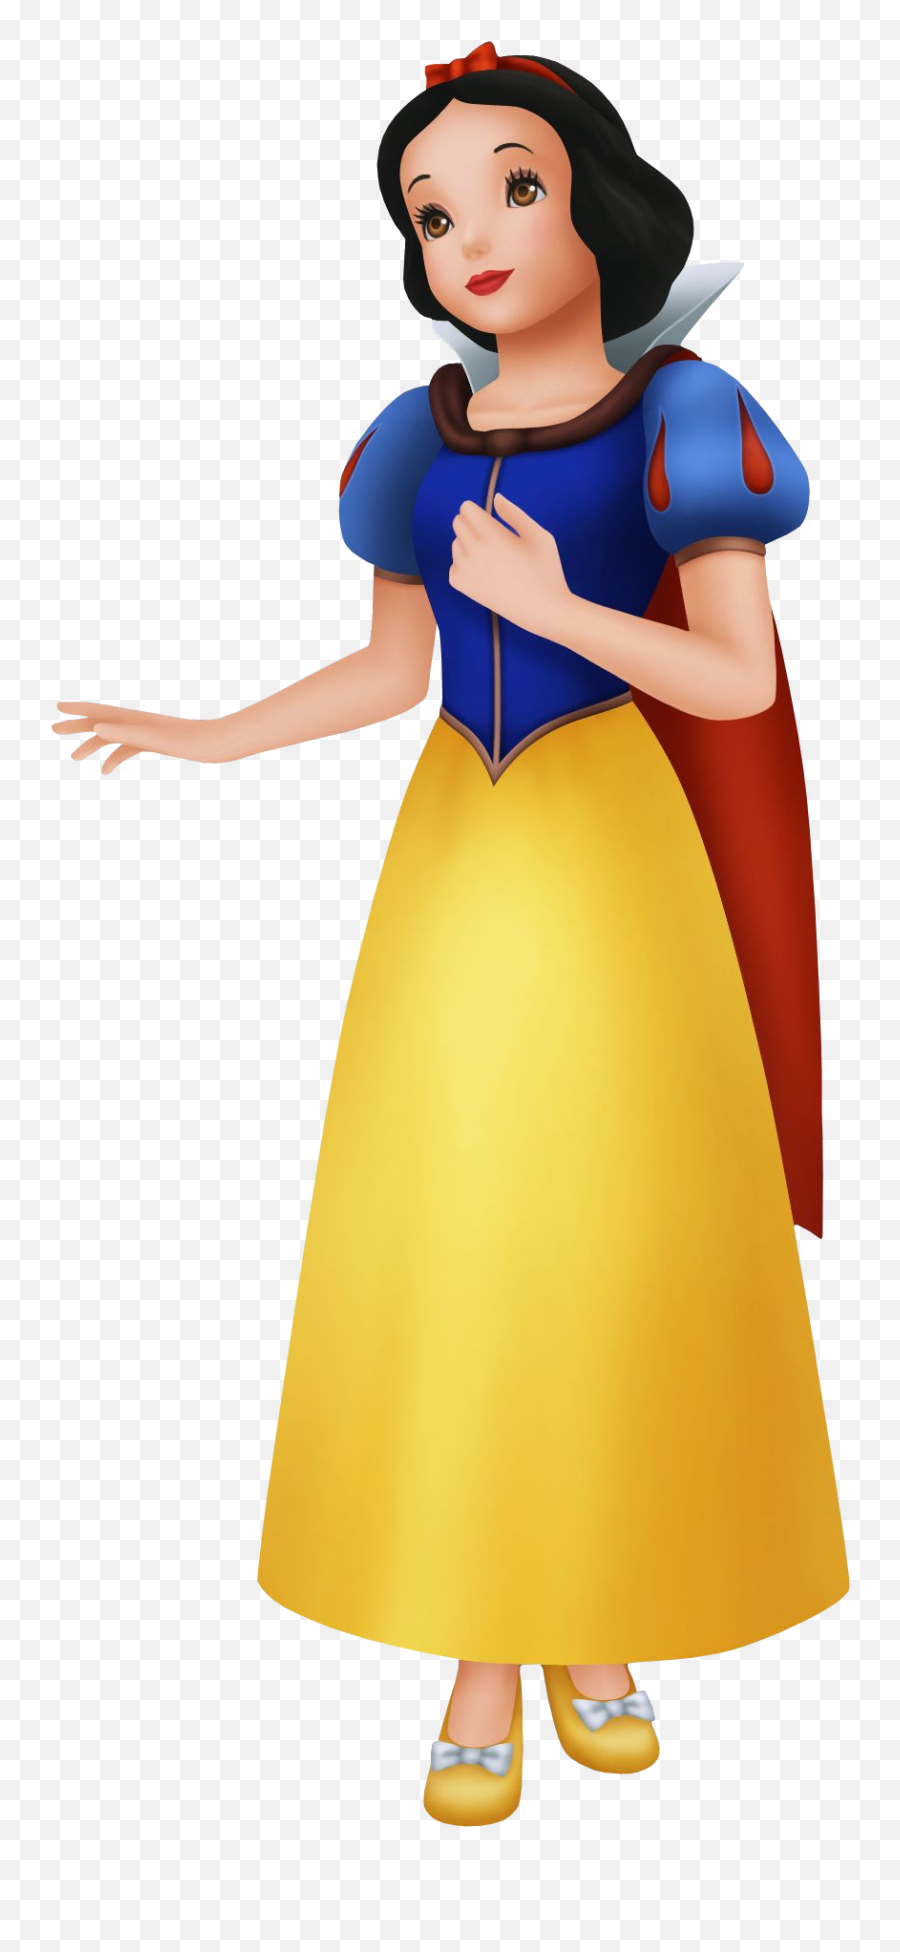 Snow White - Snow White And The Seven Dwarfs Kingdom Hearts Png,Snow White Png